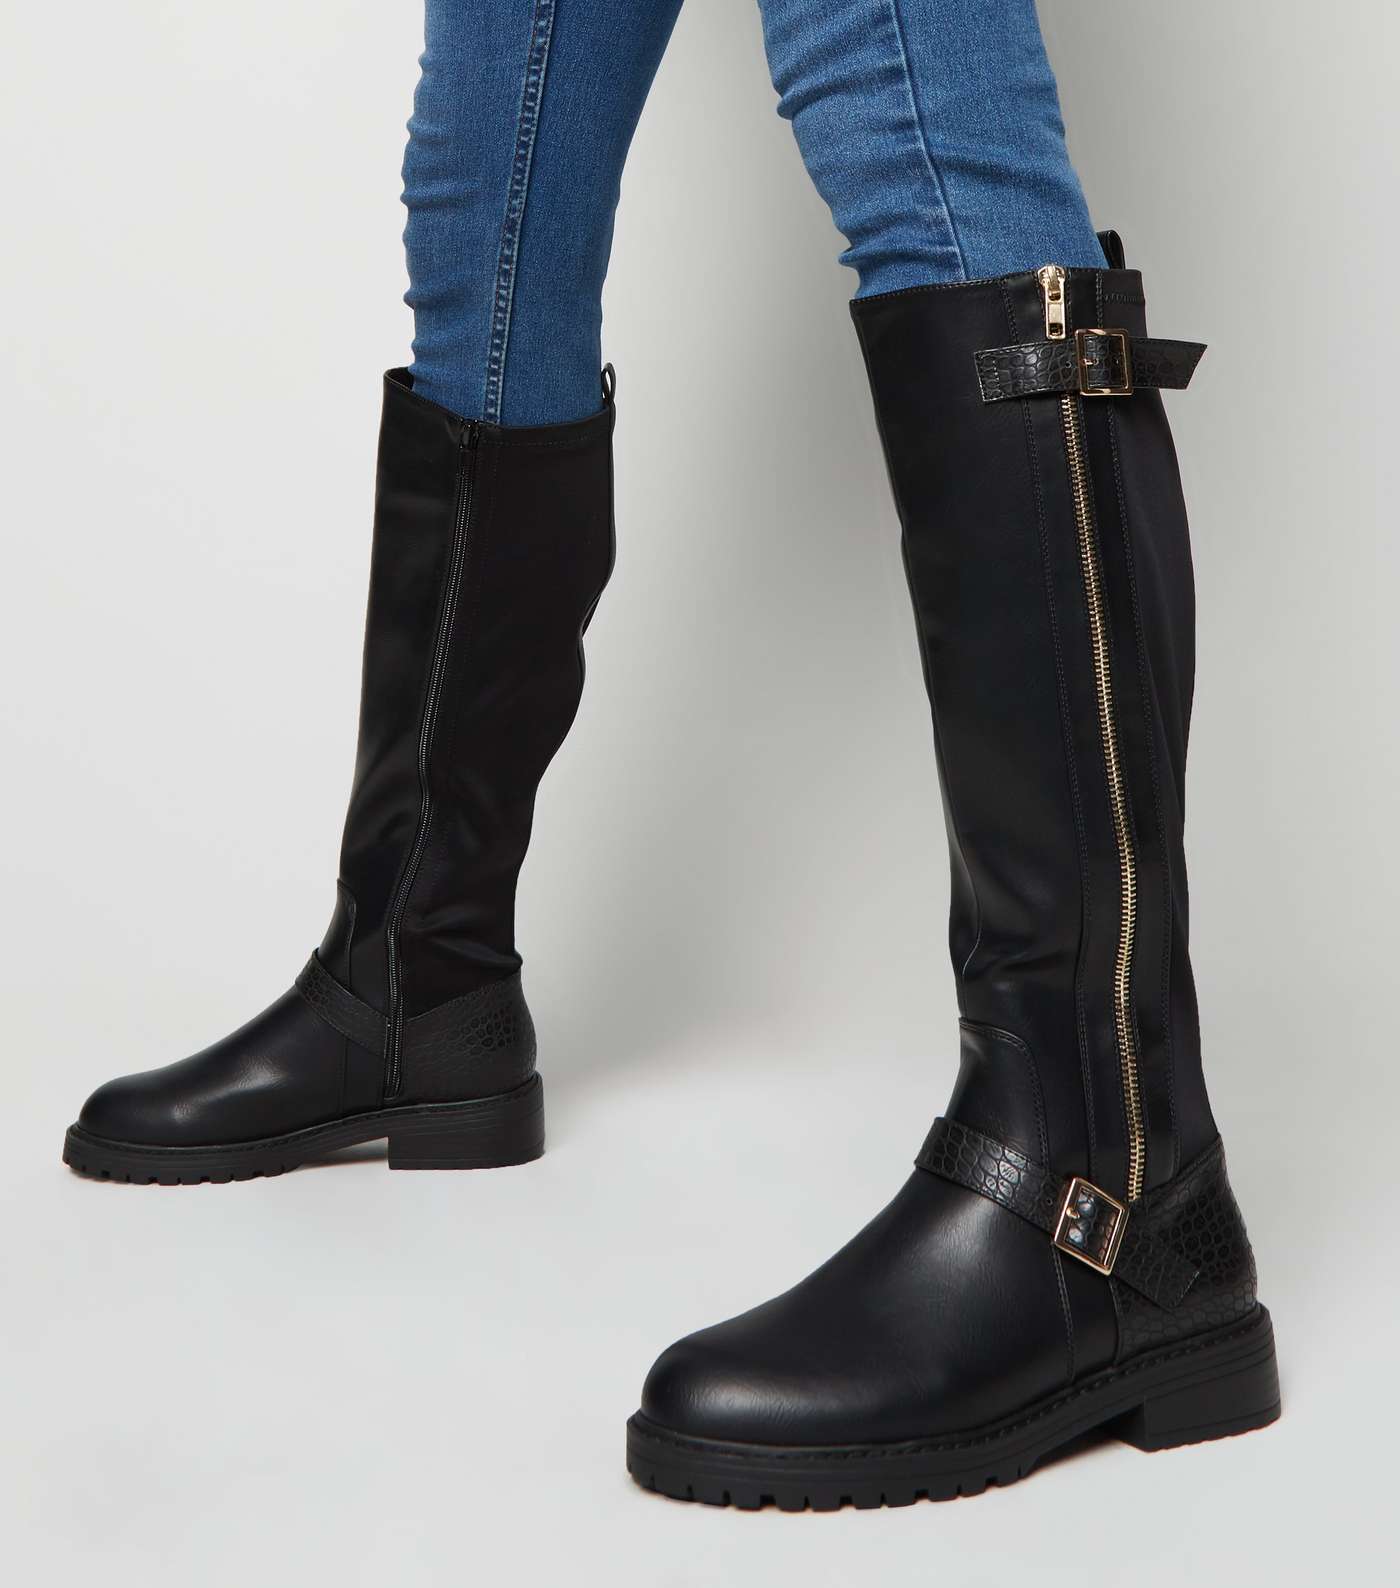 Black Side Zip Chunky Knee High Boots Image 2